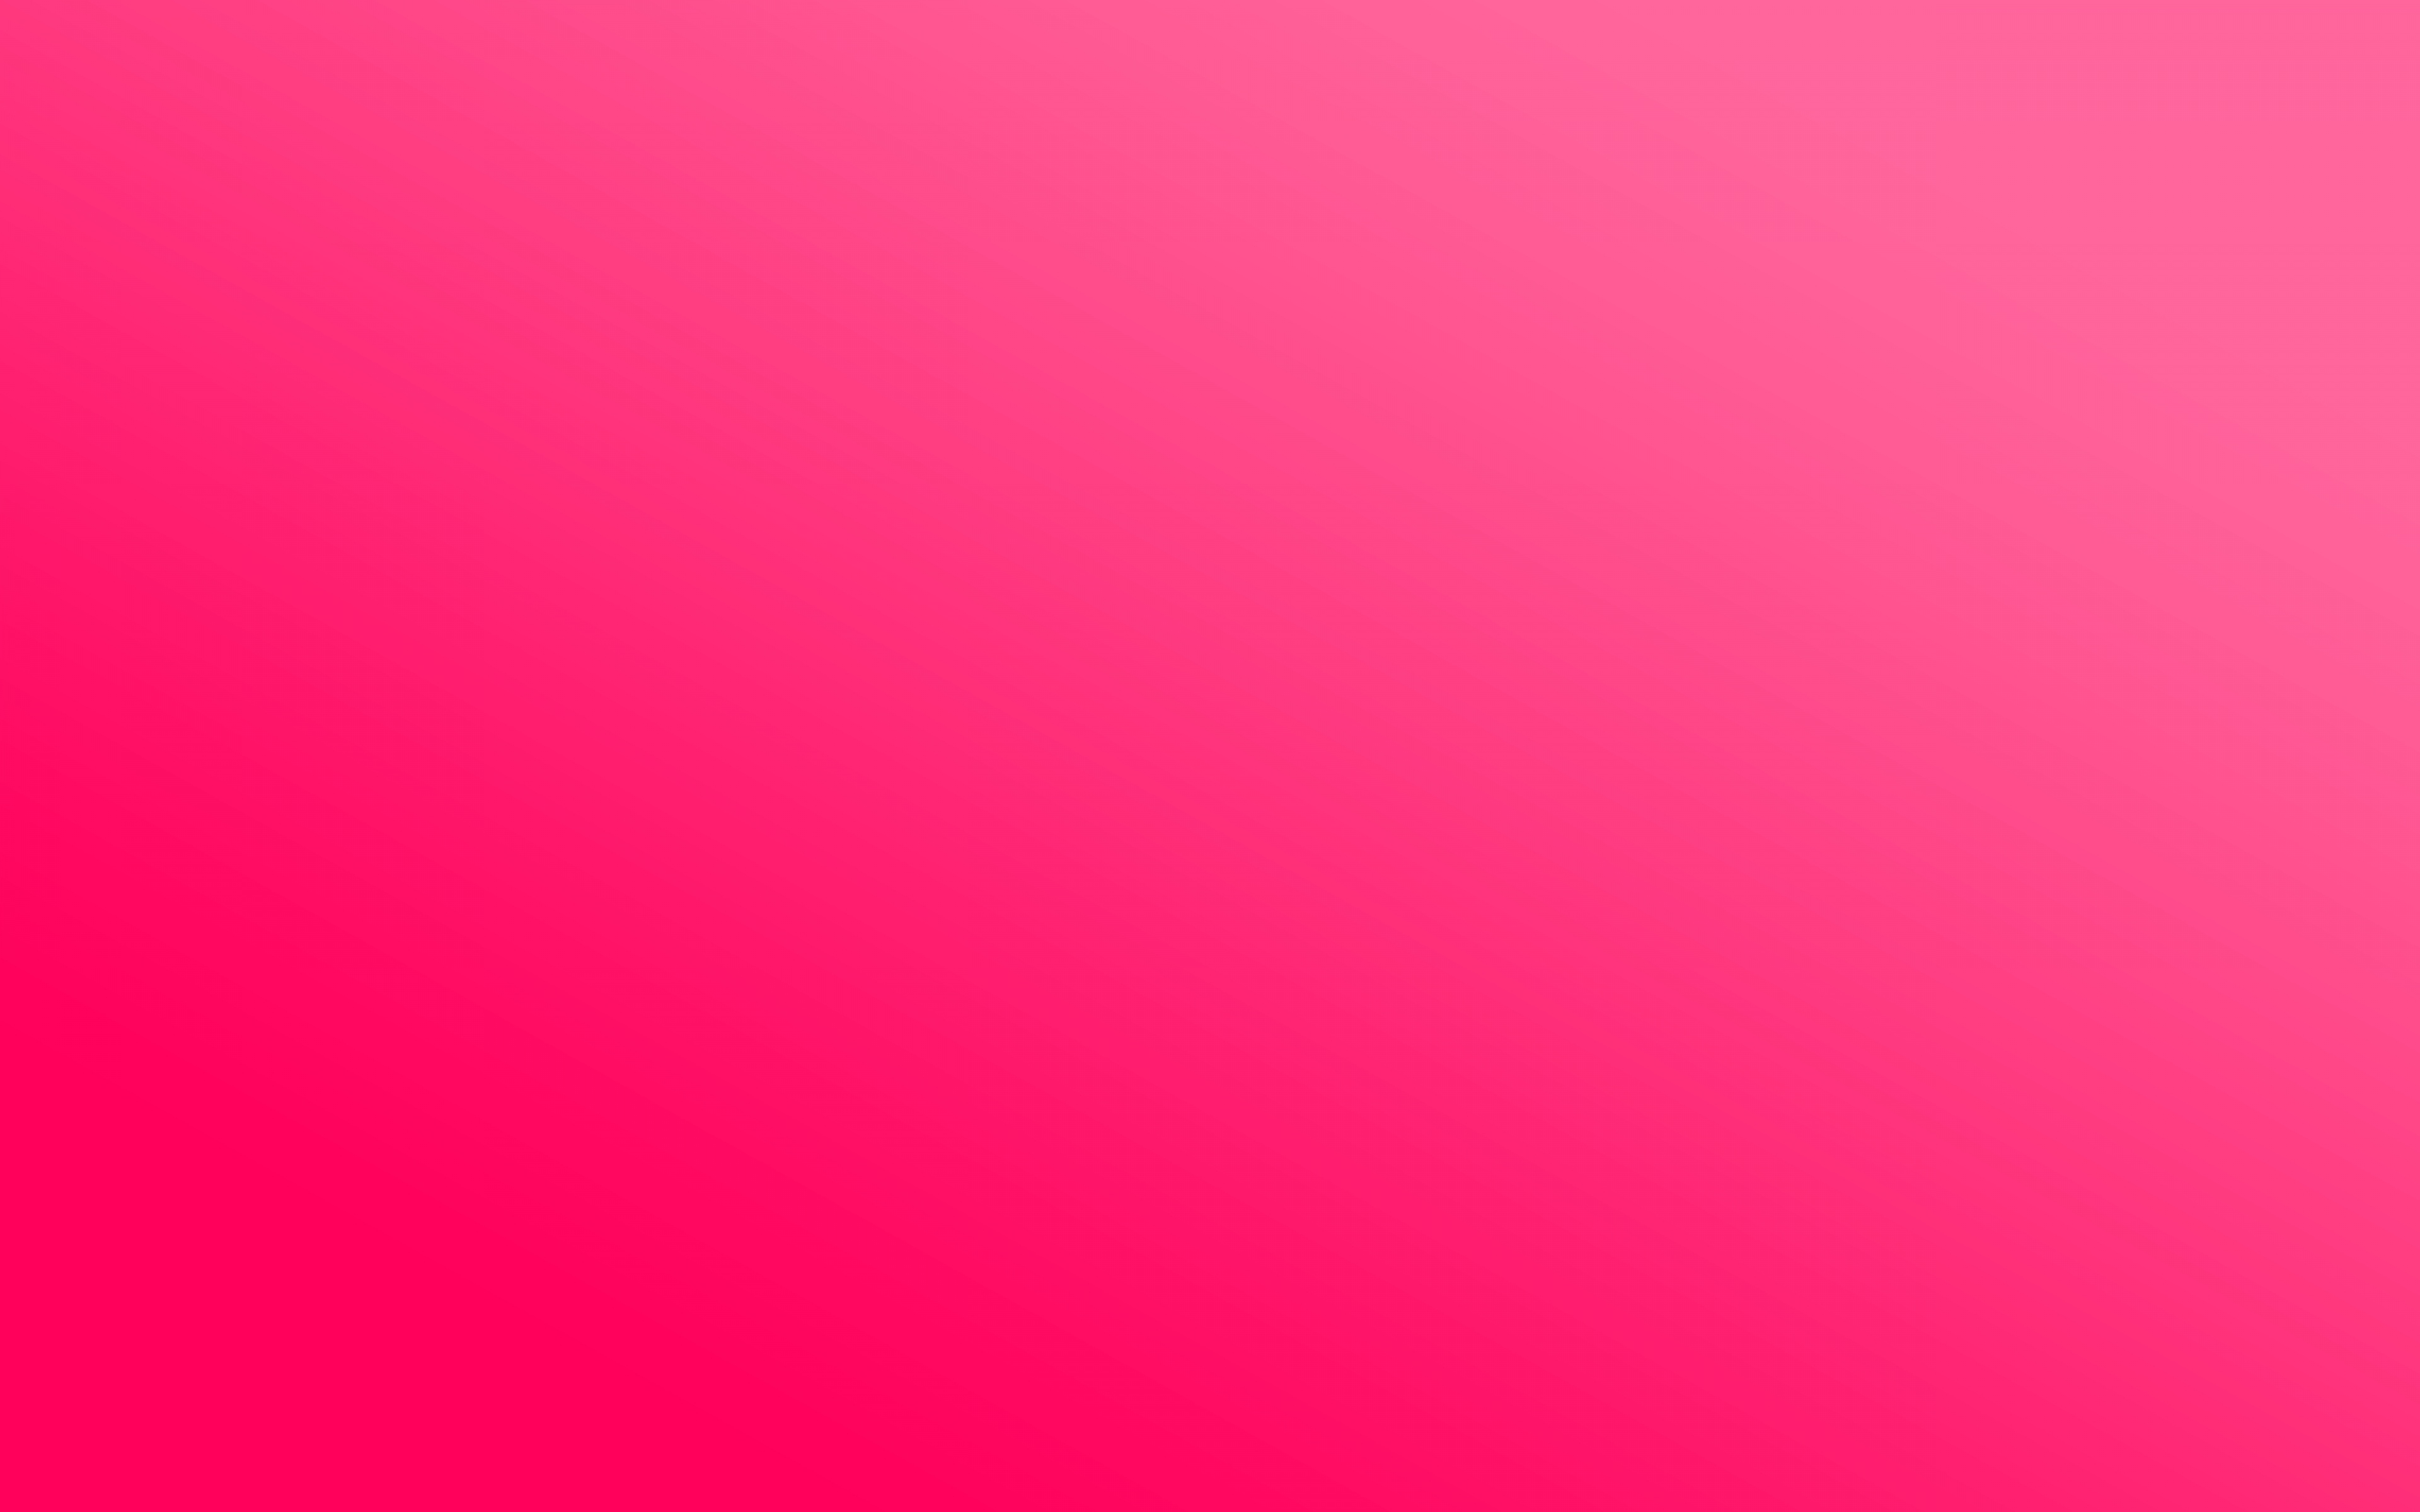 HD Background Dark Pink Solid Color Gradient Bright Light